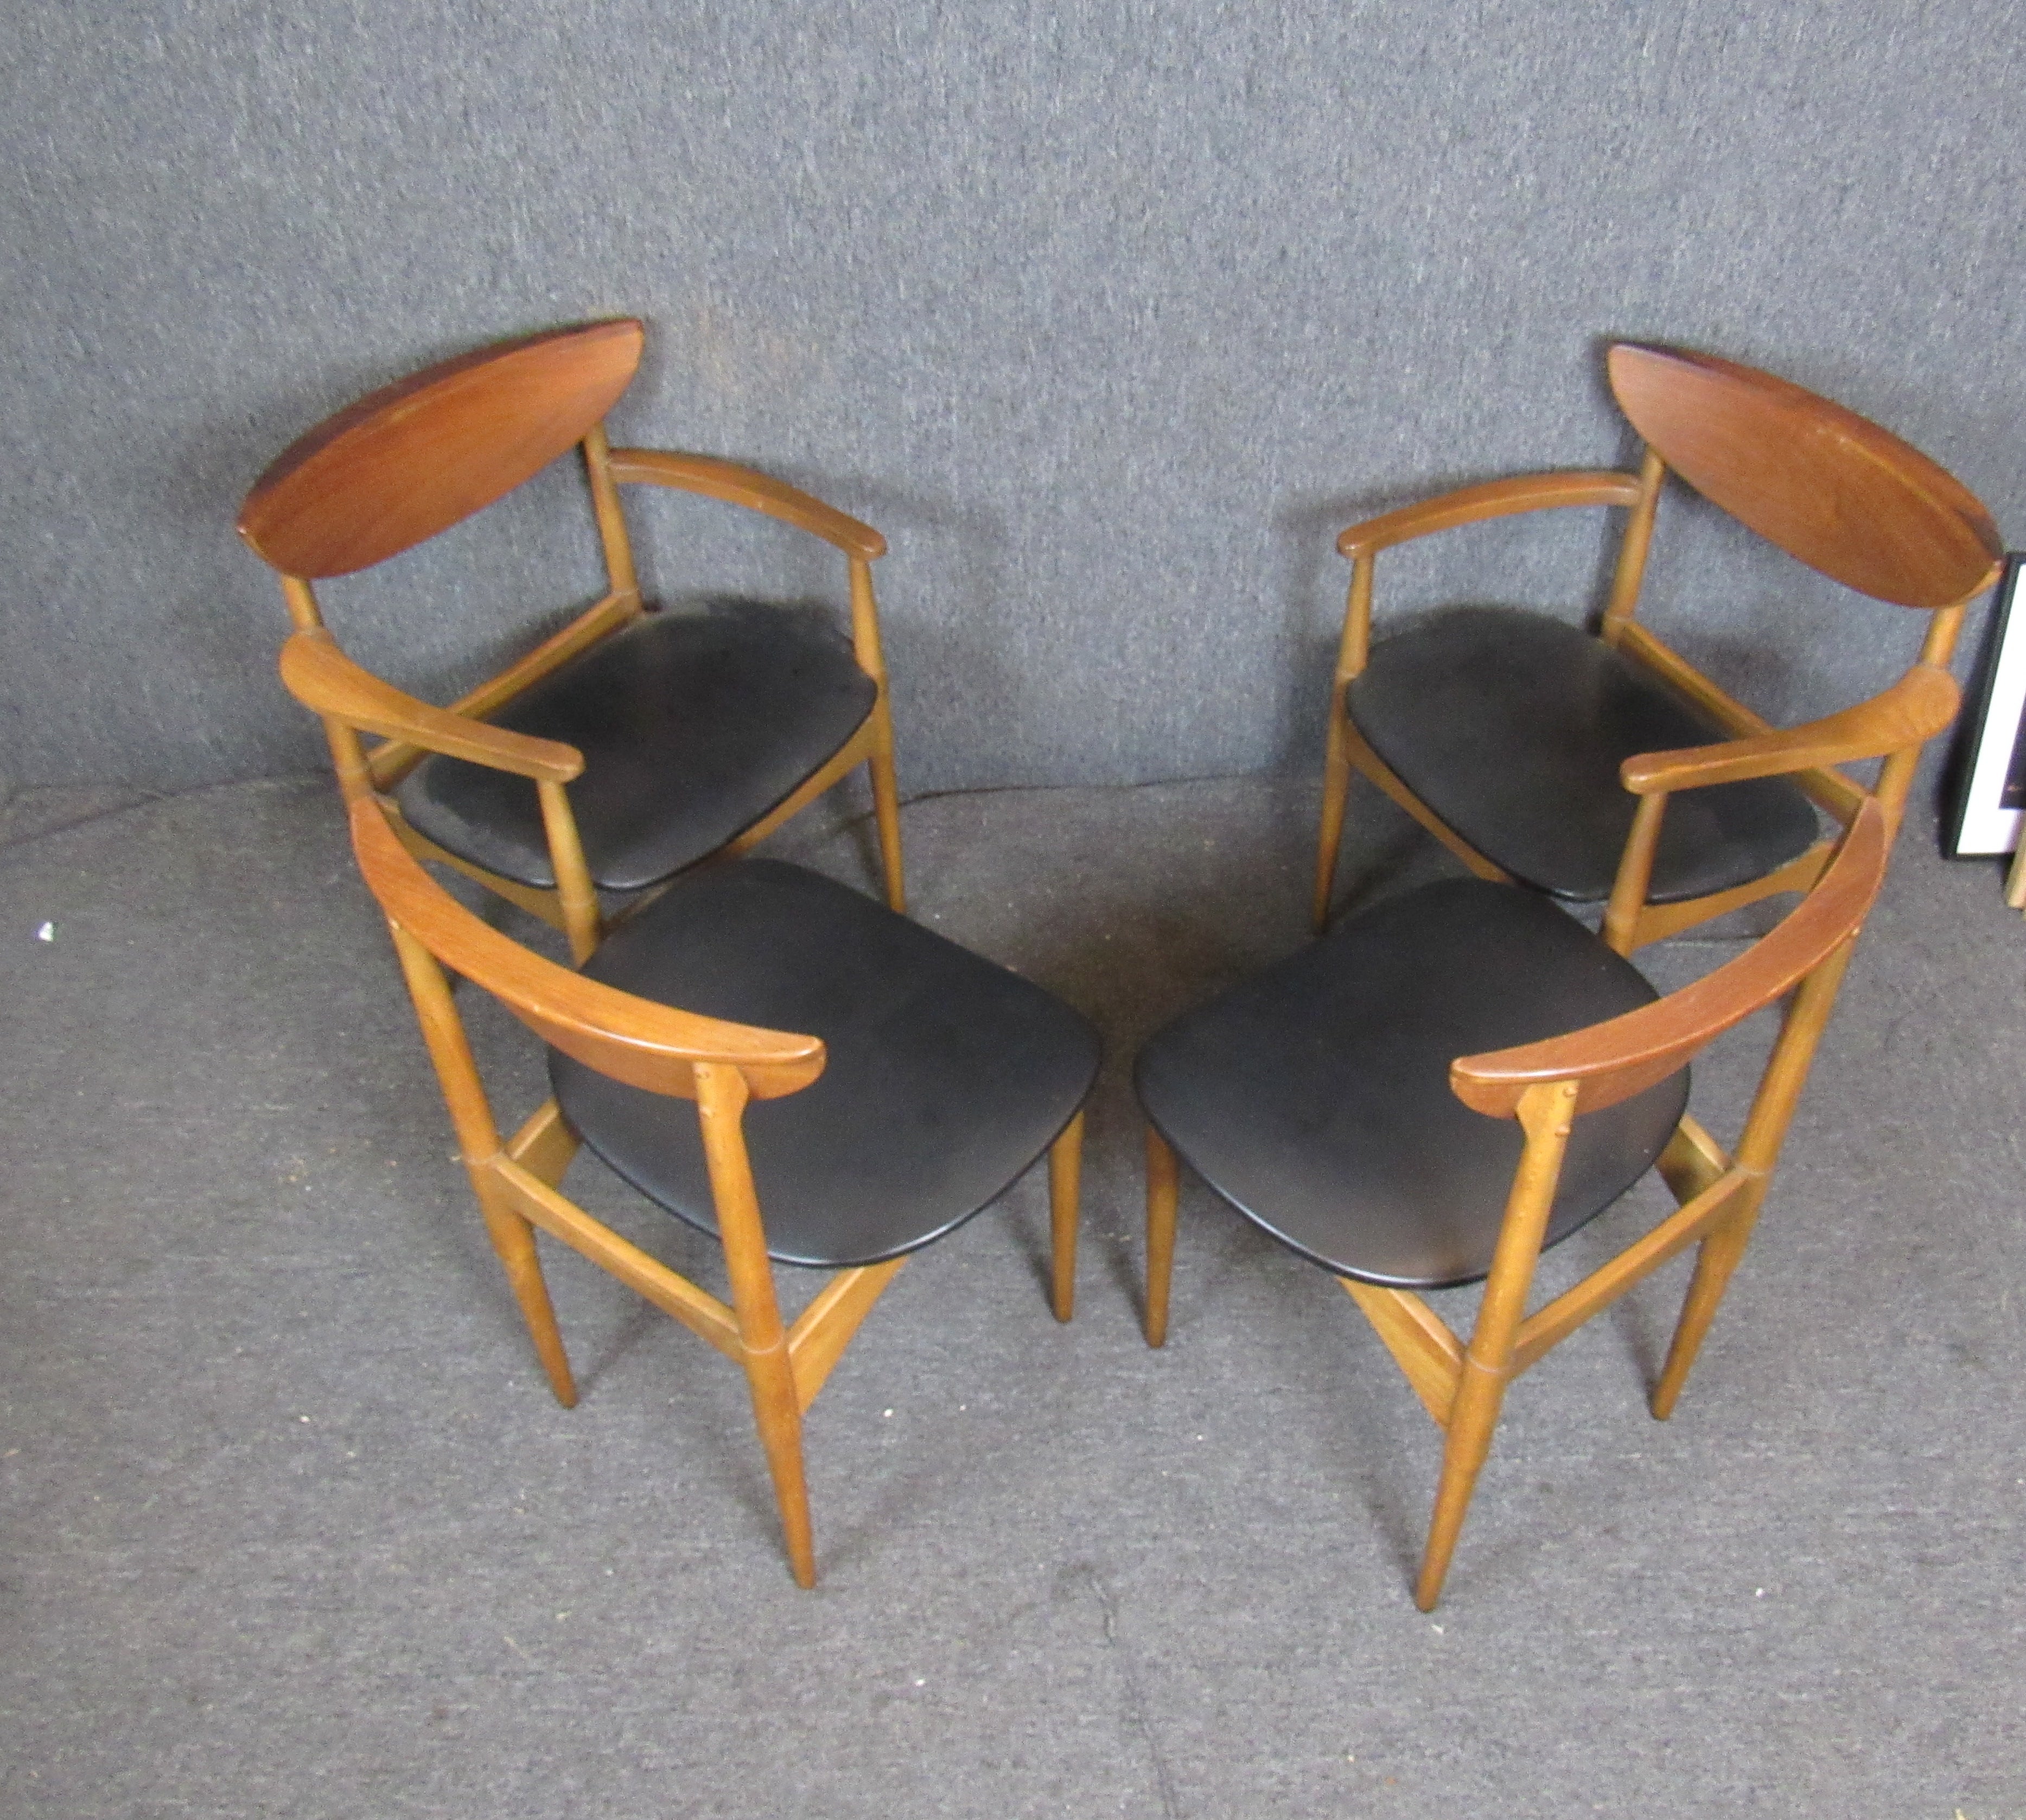 Set of four dining chairs designed for Lane Furniture by Warren Church. Unique seat backs with a fold over design. Set includes two arm chairs and two side chairs. Arm chairs measure 24